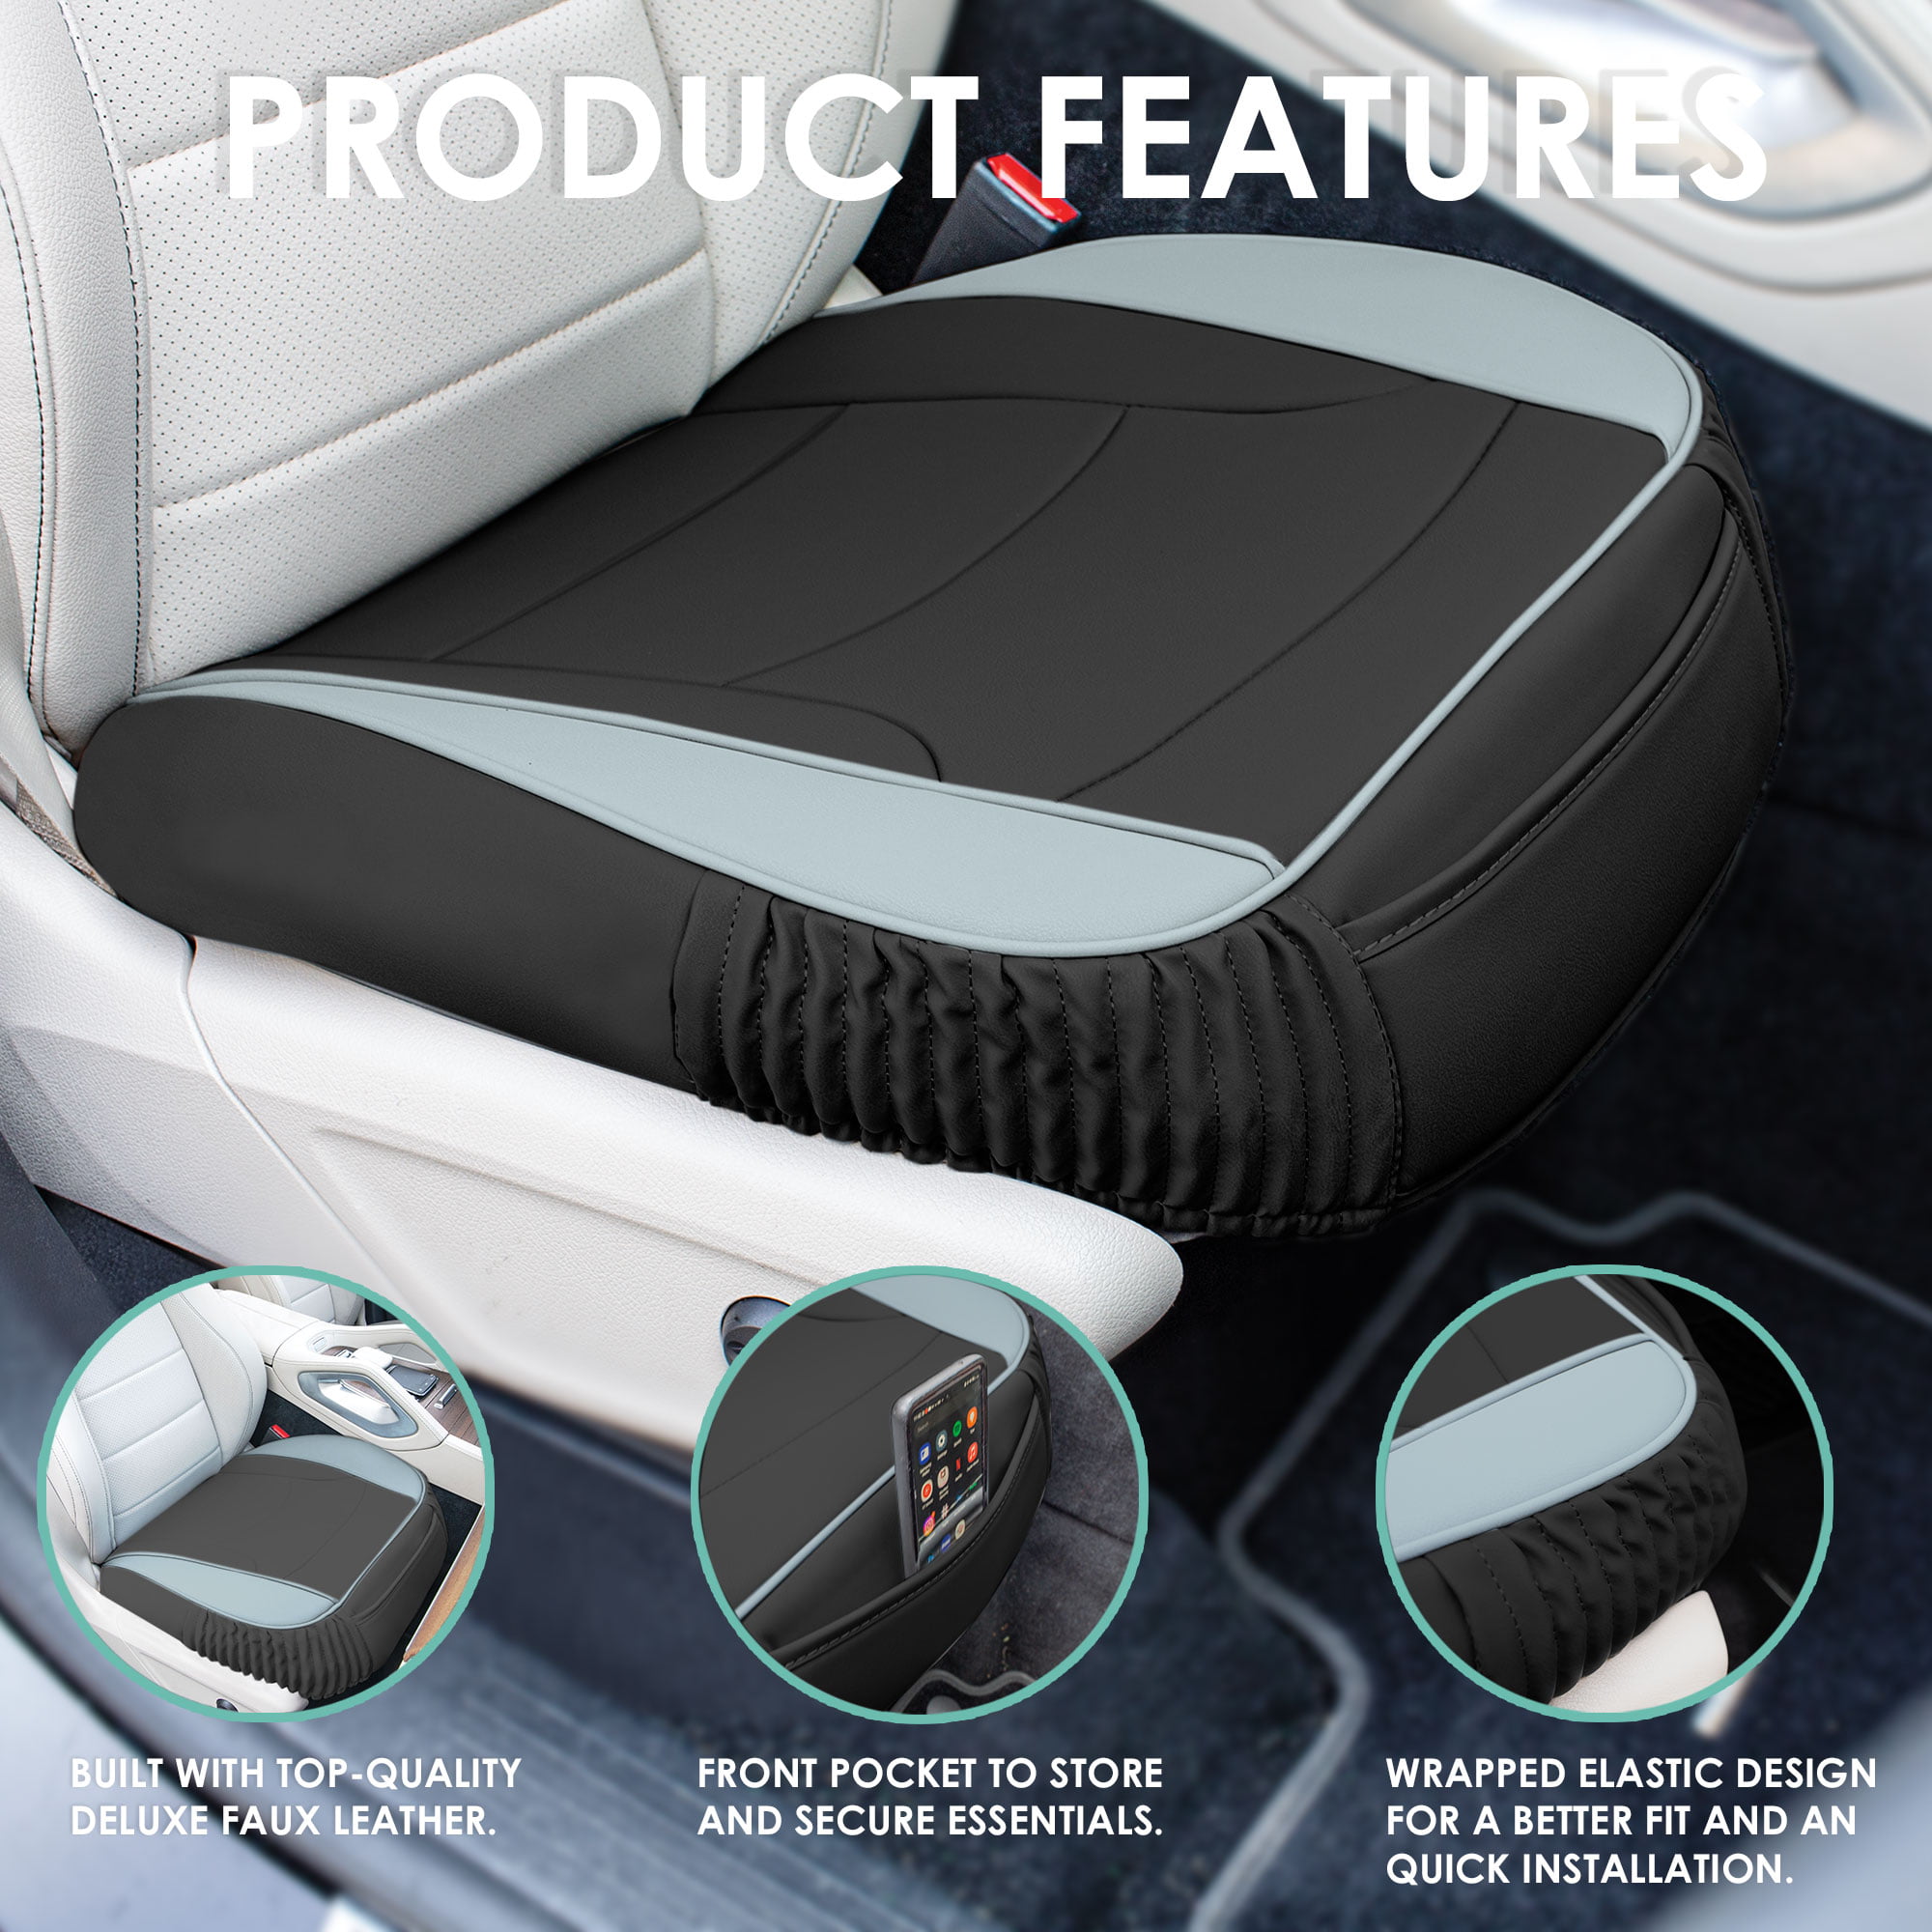 FH Group Car Seat Cushion – Durable PU Leather Bottom Seat Protector, Water  Resistant for Car, Sedan, Truck, SUV Gray/Black 